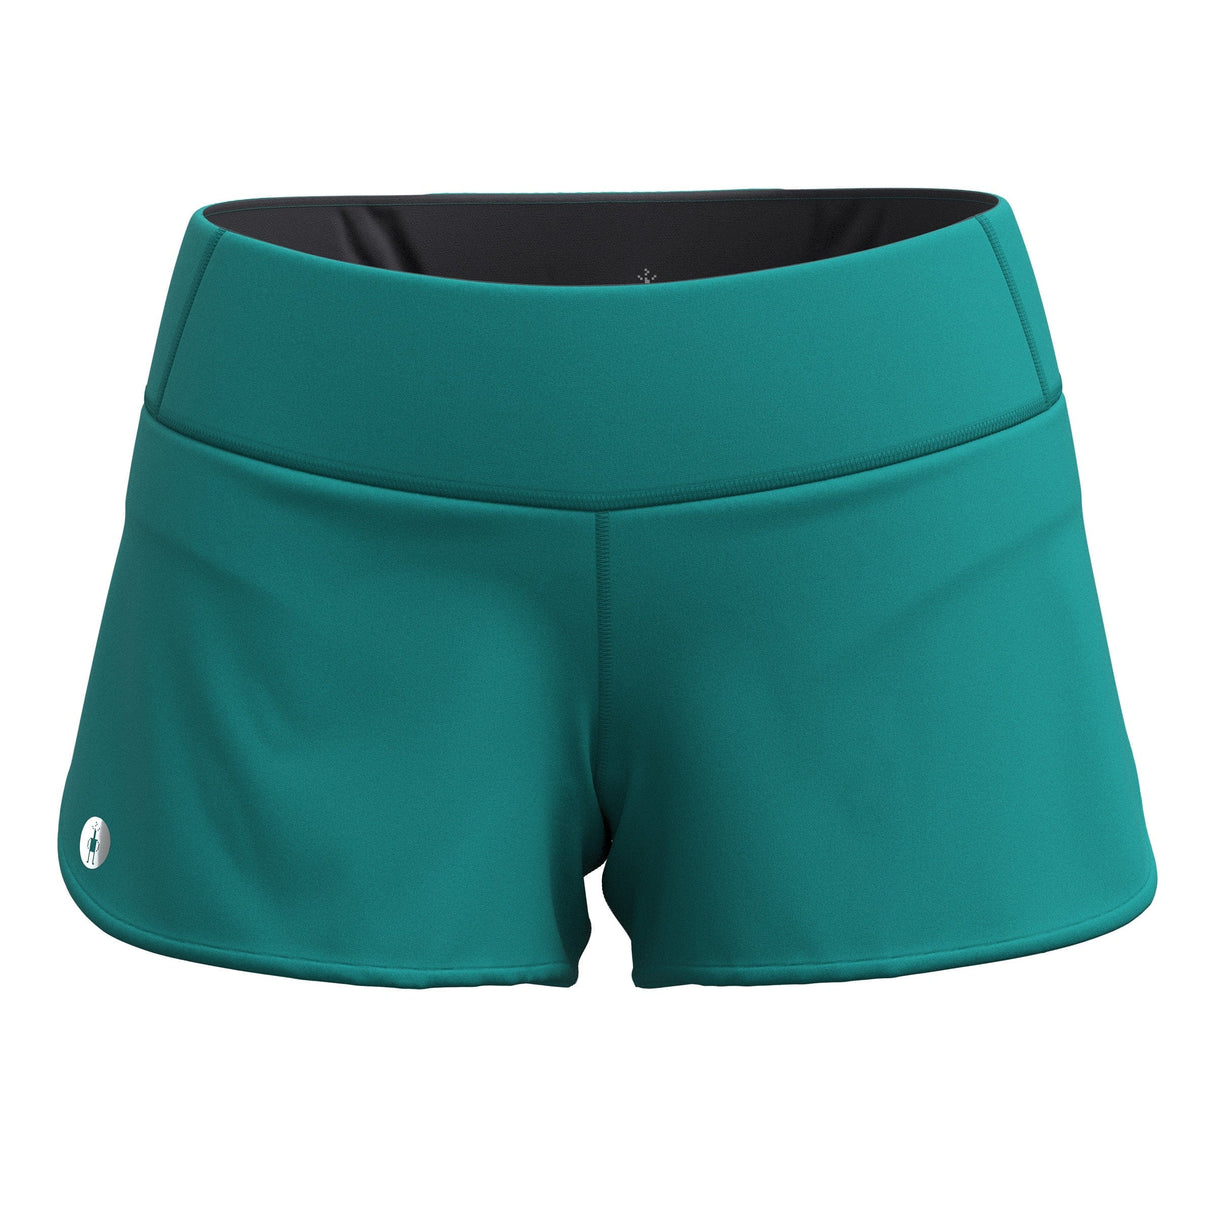 Smartwool Womens Active Lined Shorts  -  Small / Emerald Green